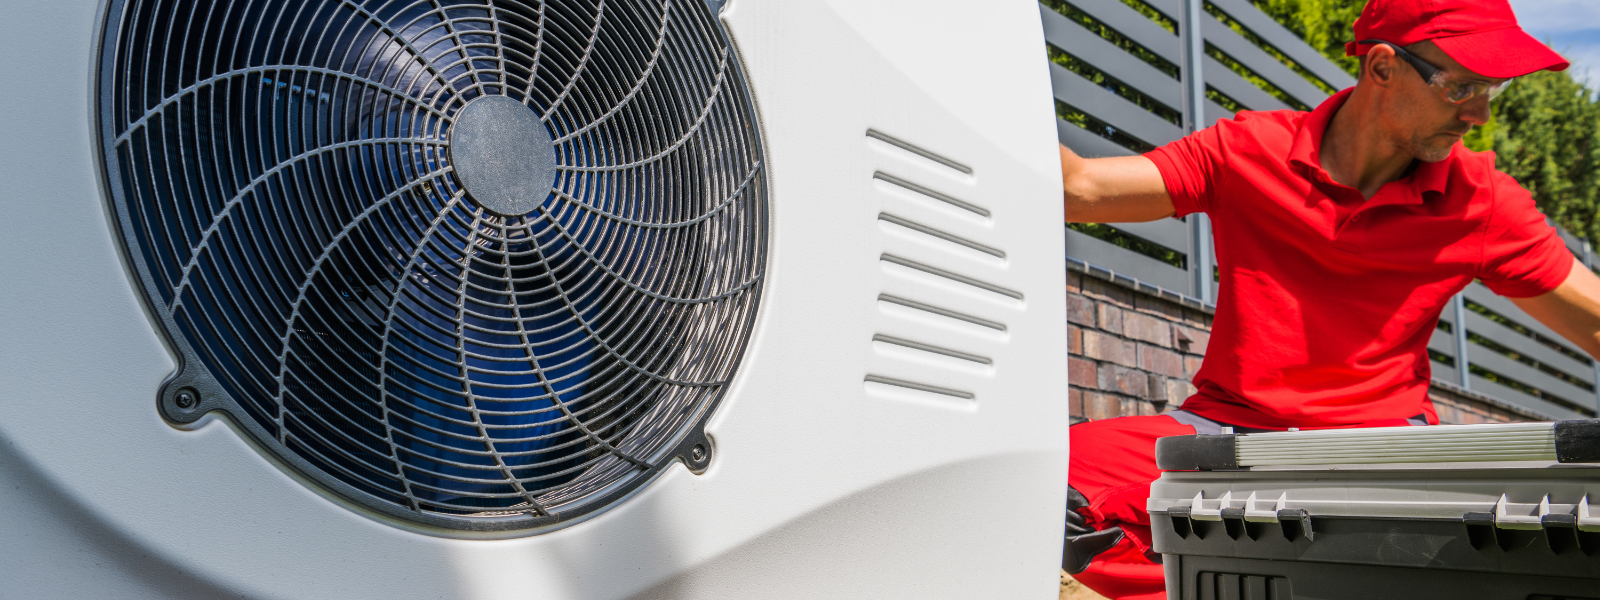 SOLARFAN OÜ - cooling and air conditioning systems, heat pumps, heat pumps, repair, maintenance, Air heat pumps, ground s...